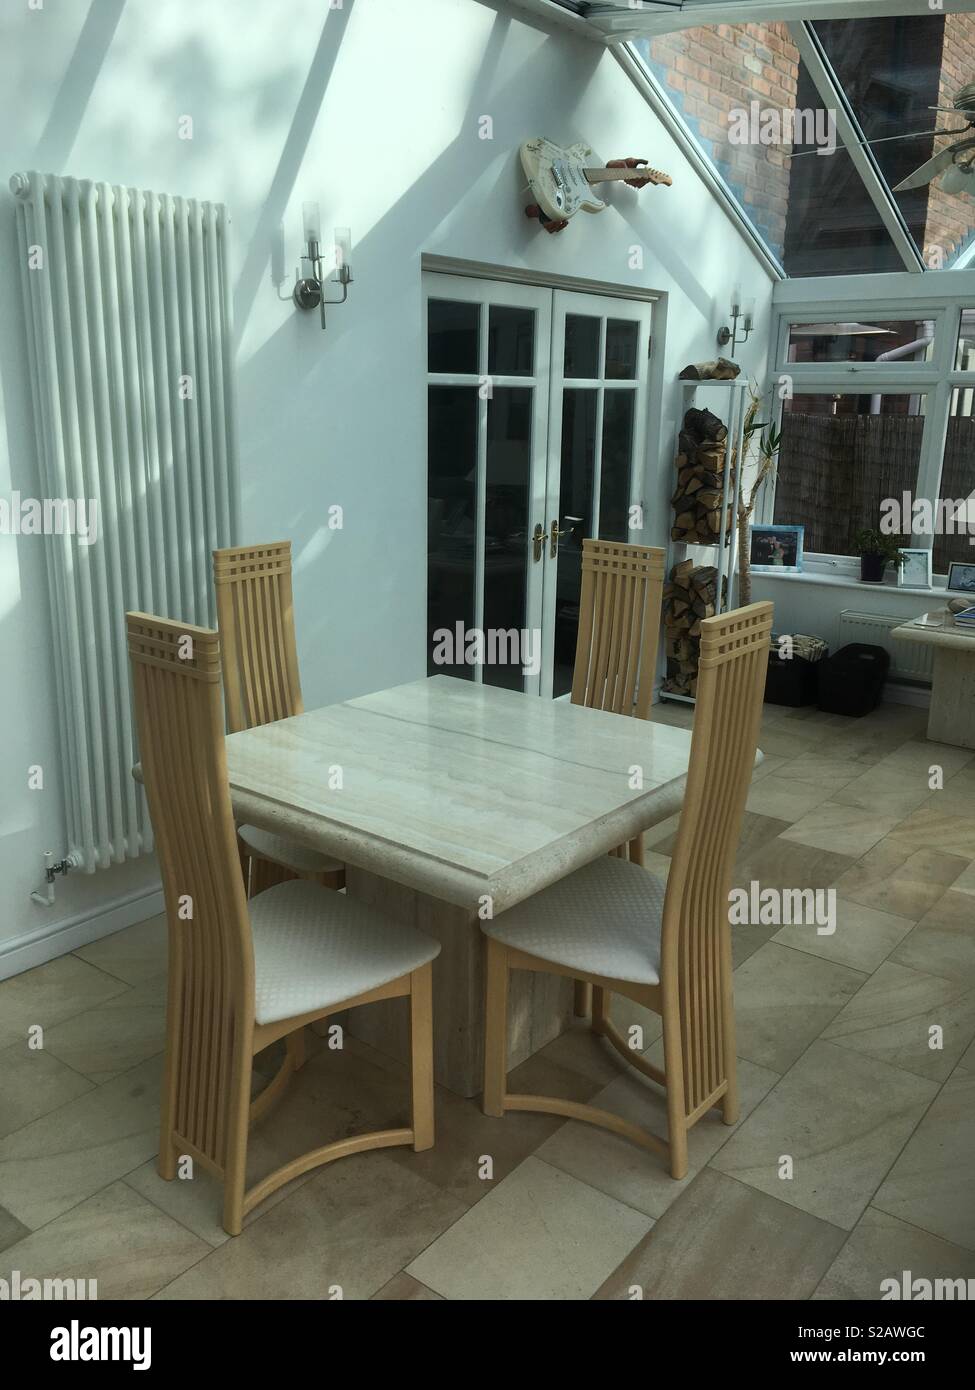 Dining Table Chairs In Conservatory With Guitar Decor On Wall